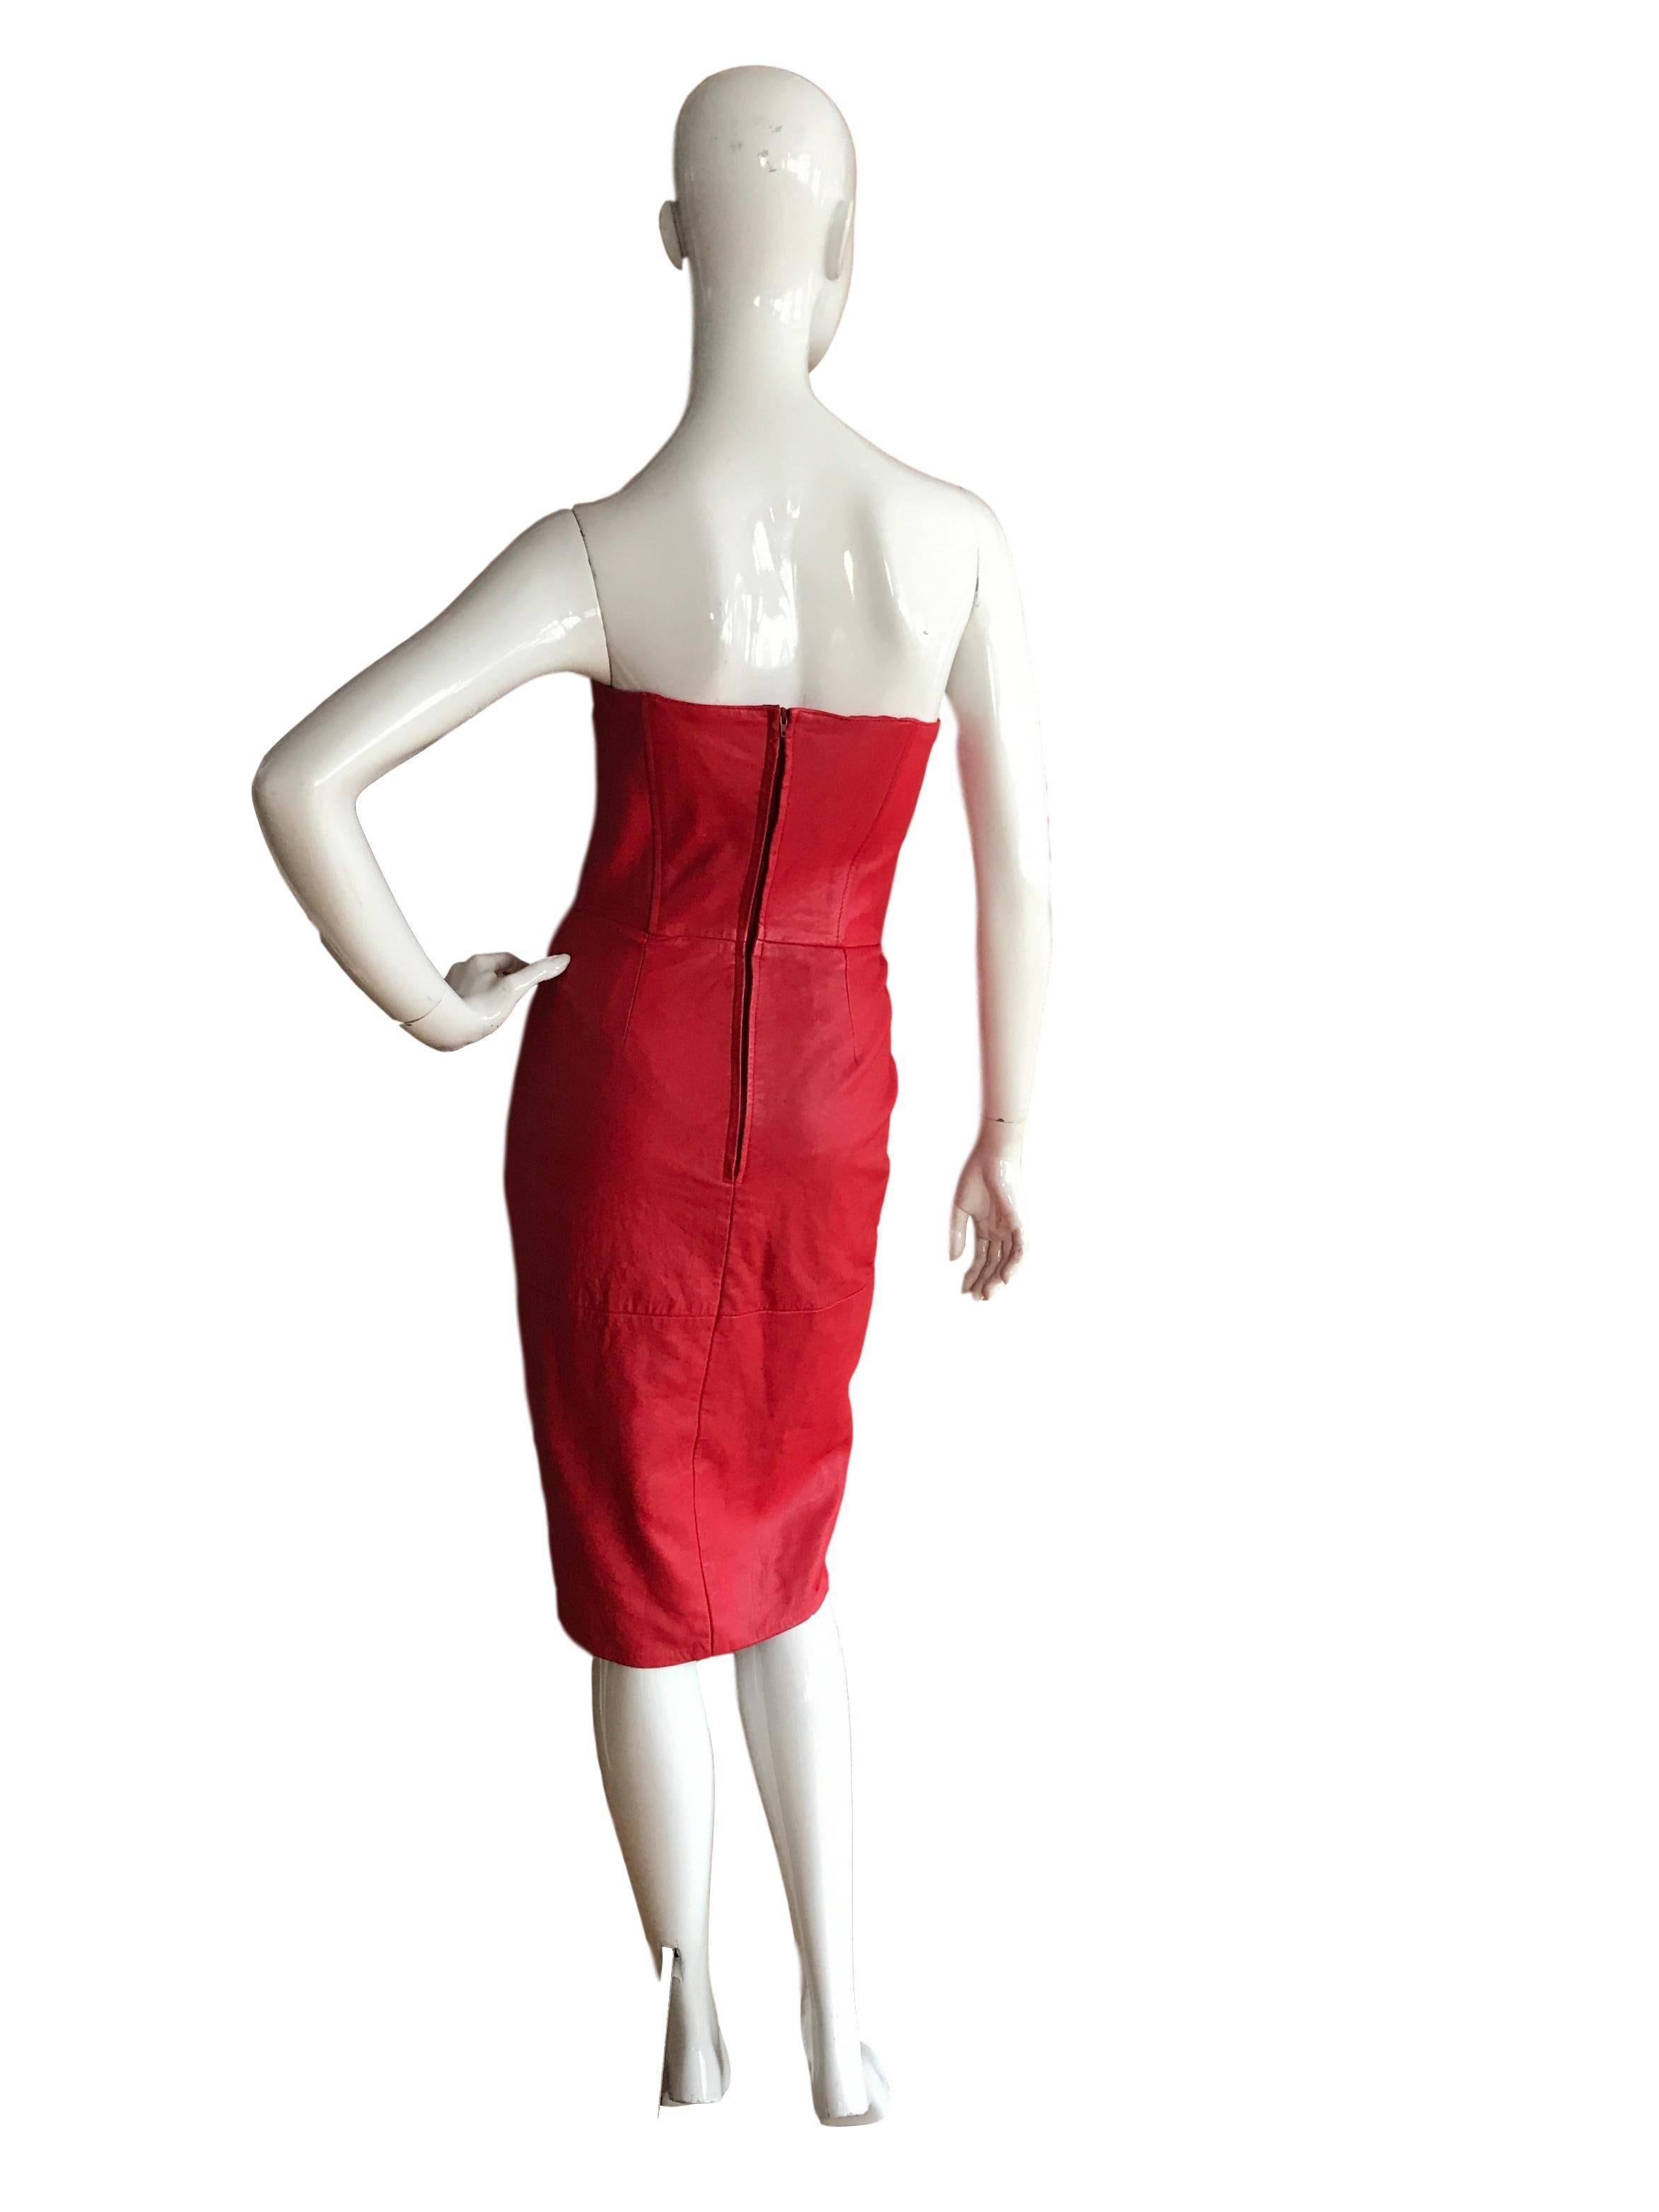 Killer 1980s Travilla red butter soft leather dress, boned bustier with back zip and is lined. 

Measures 36 bust, 28 waist and 32 inches length 

Excellent condition